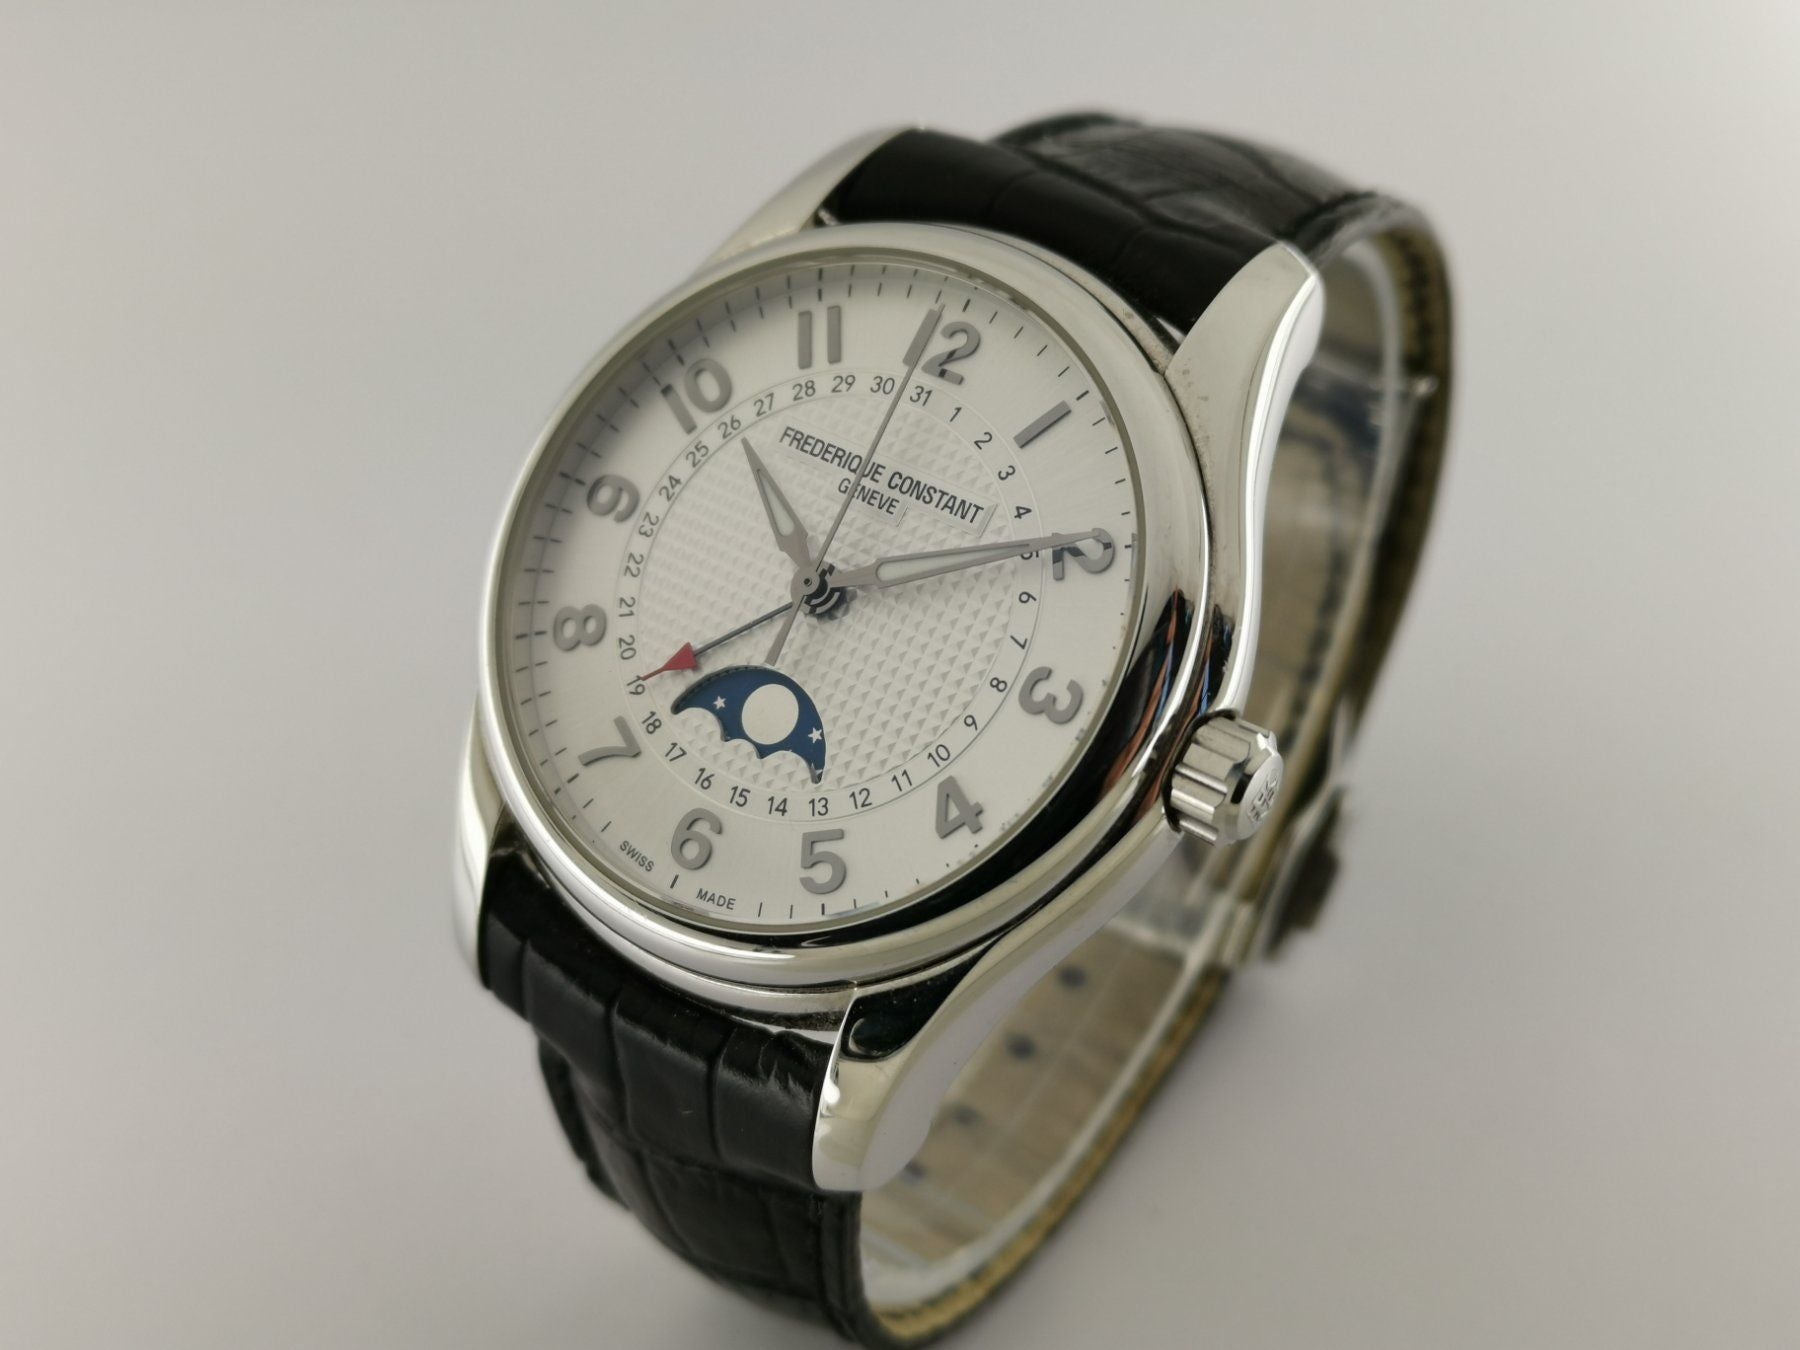 Frédérique Constant Runabout Moonphase Limited Edition